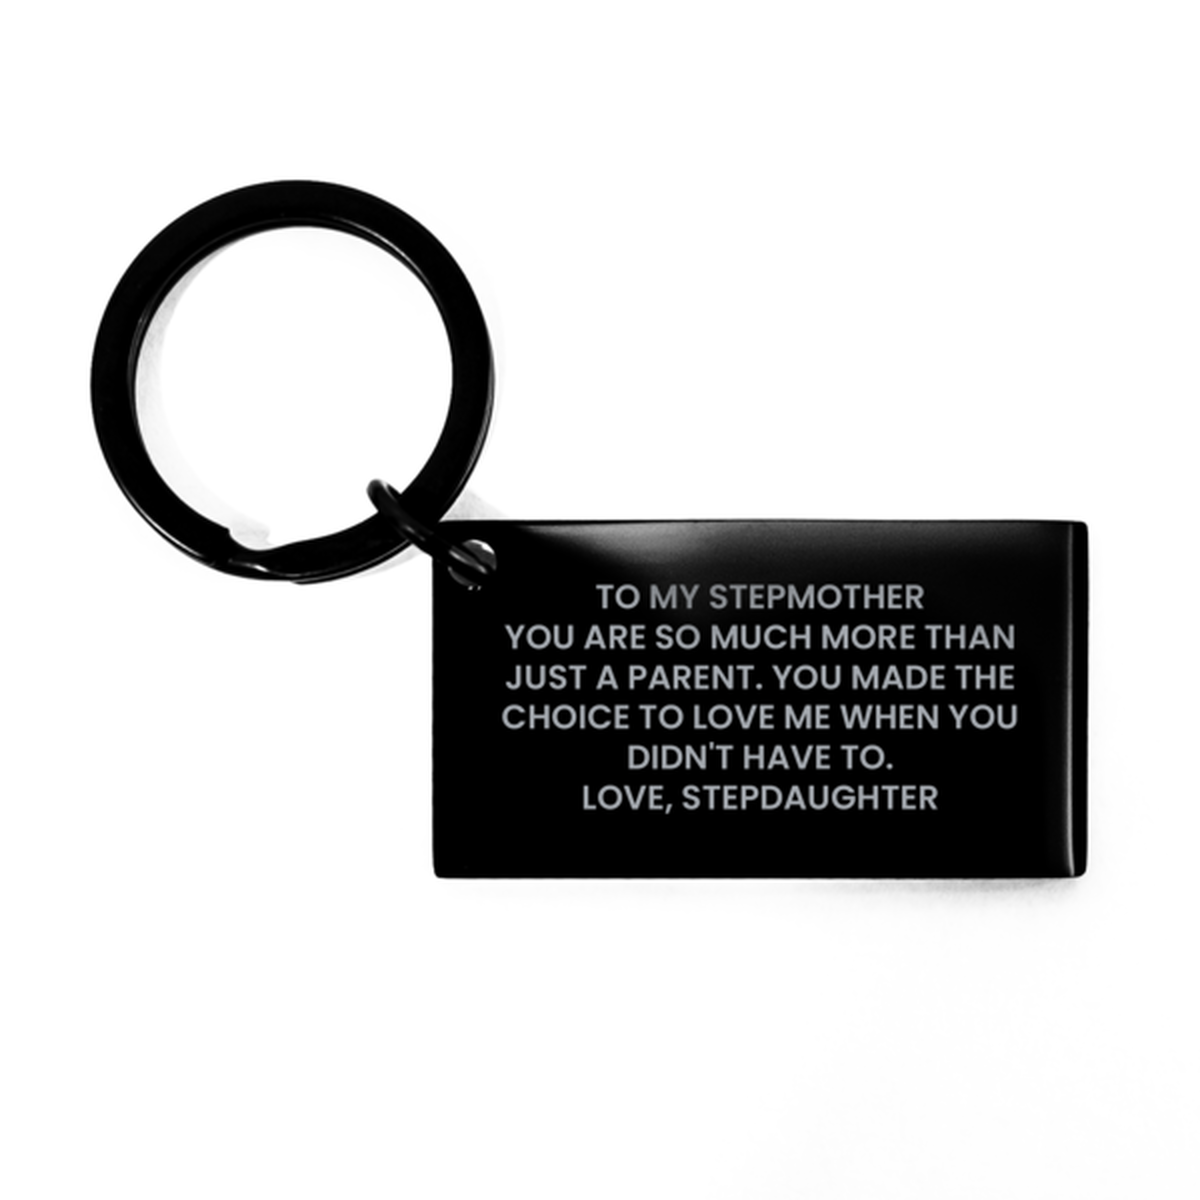 To My Stepmother   Black Keychain, Just A Parent, Valentines Gifts For Stepmother From Stepdaughter, Birthday Gifts For Women